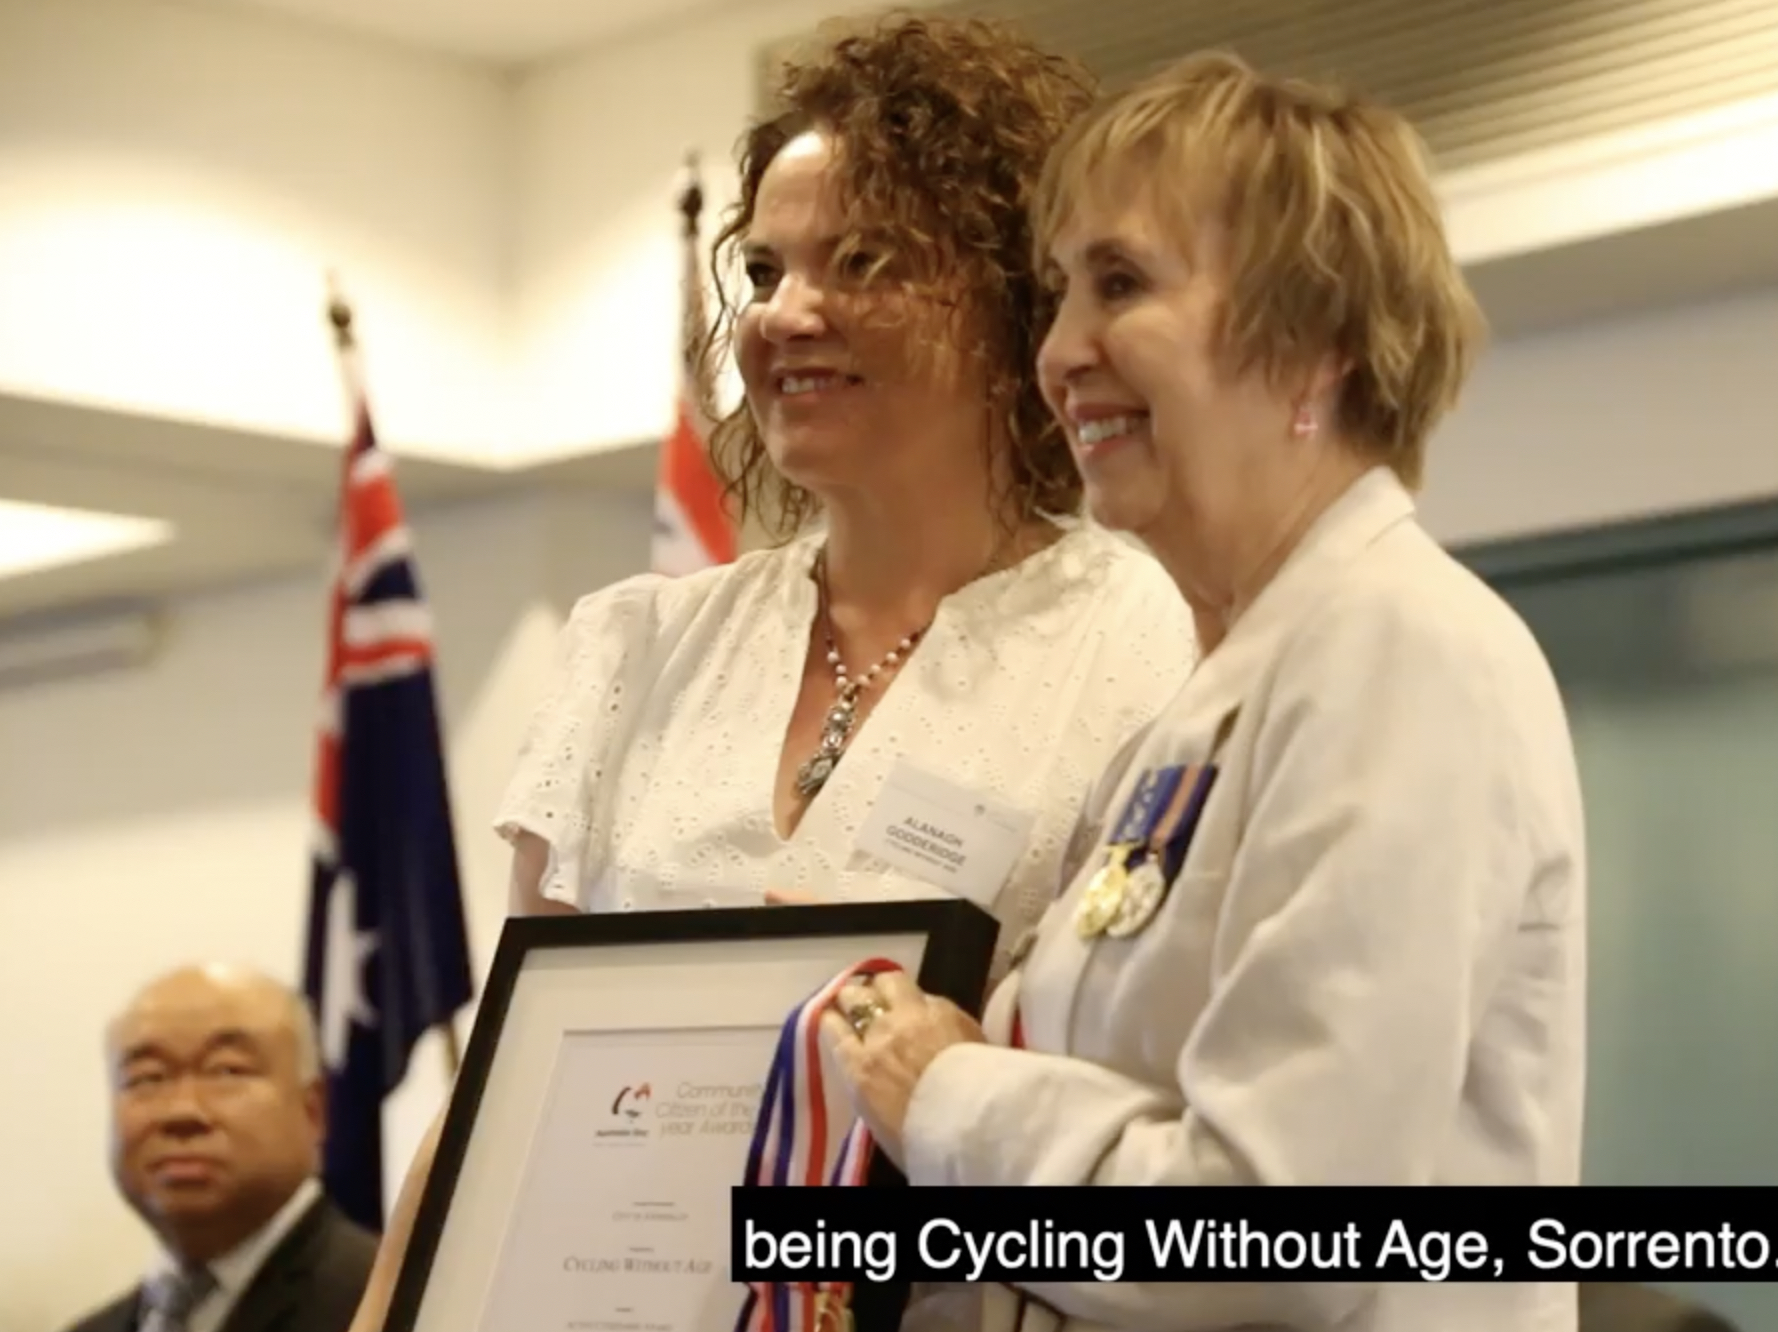 Active Citizenship Award by City of Joondalup